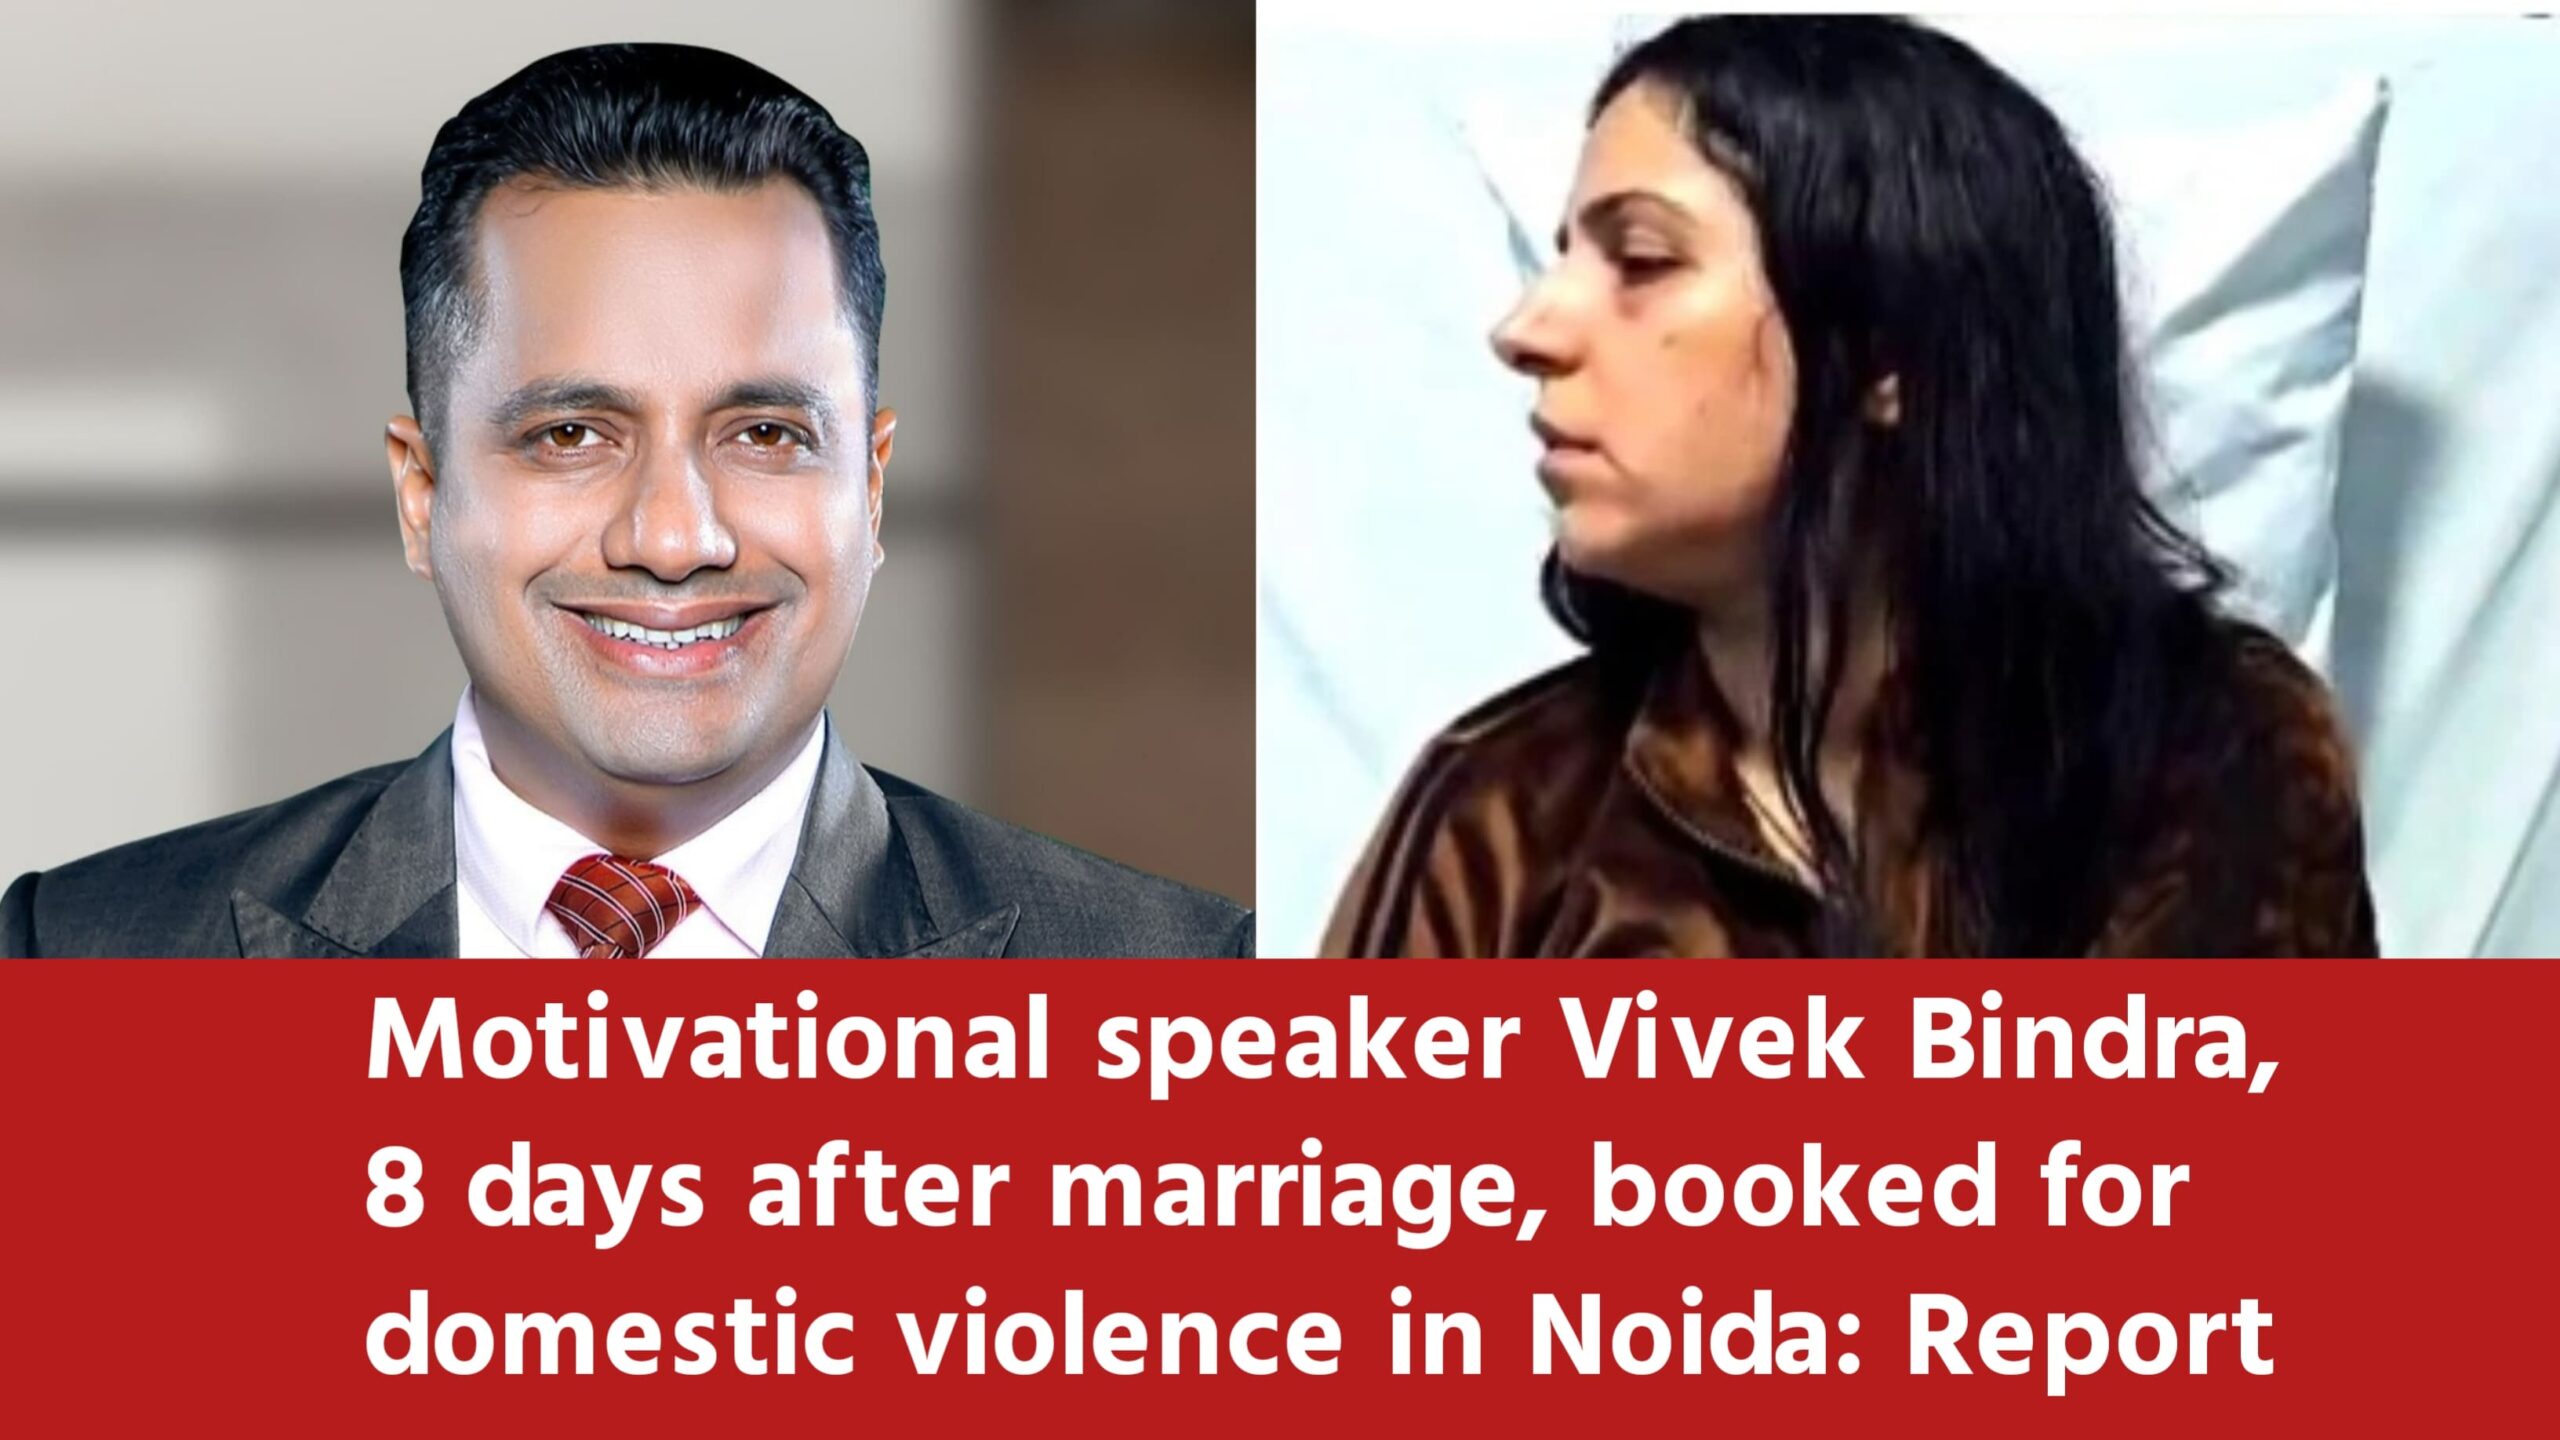 Motivational speaker Vivek Bindra, 8 days after marriage, booked for domestic violence in Noida Report